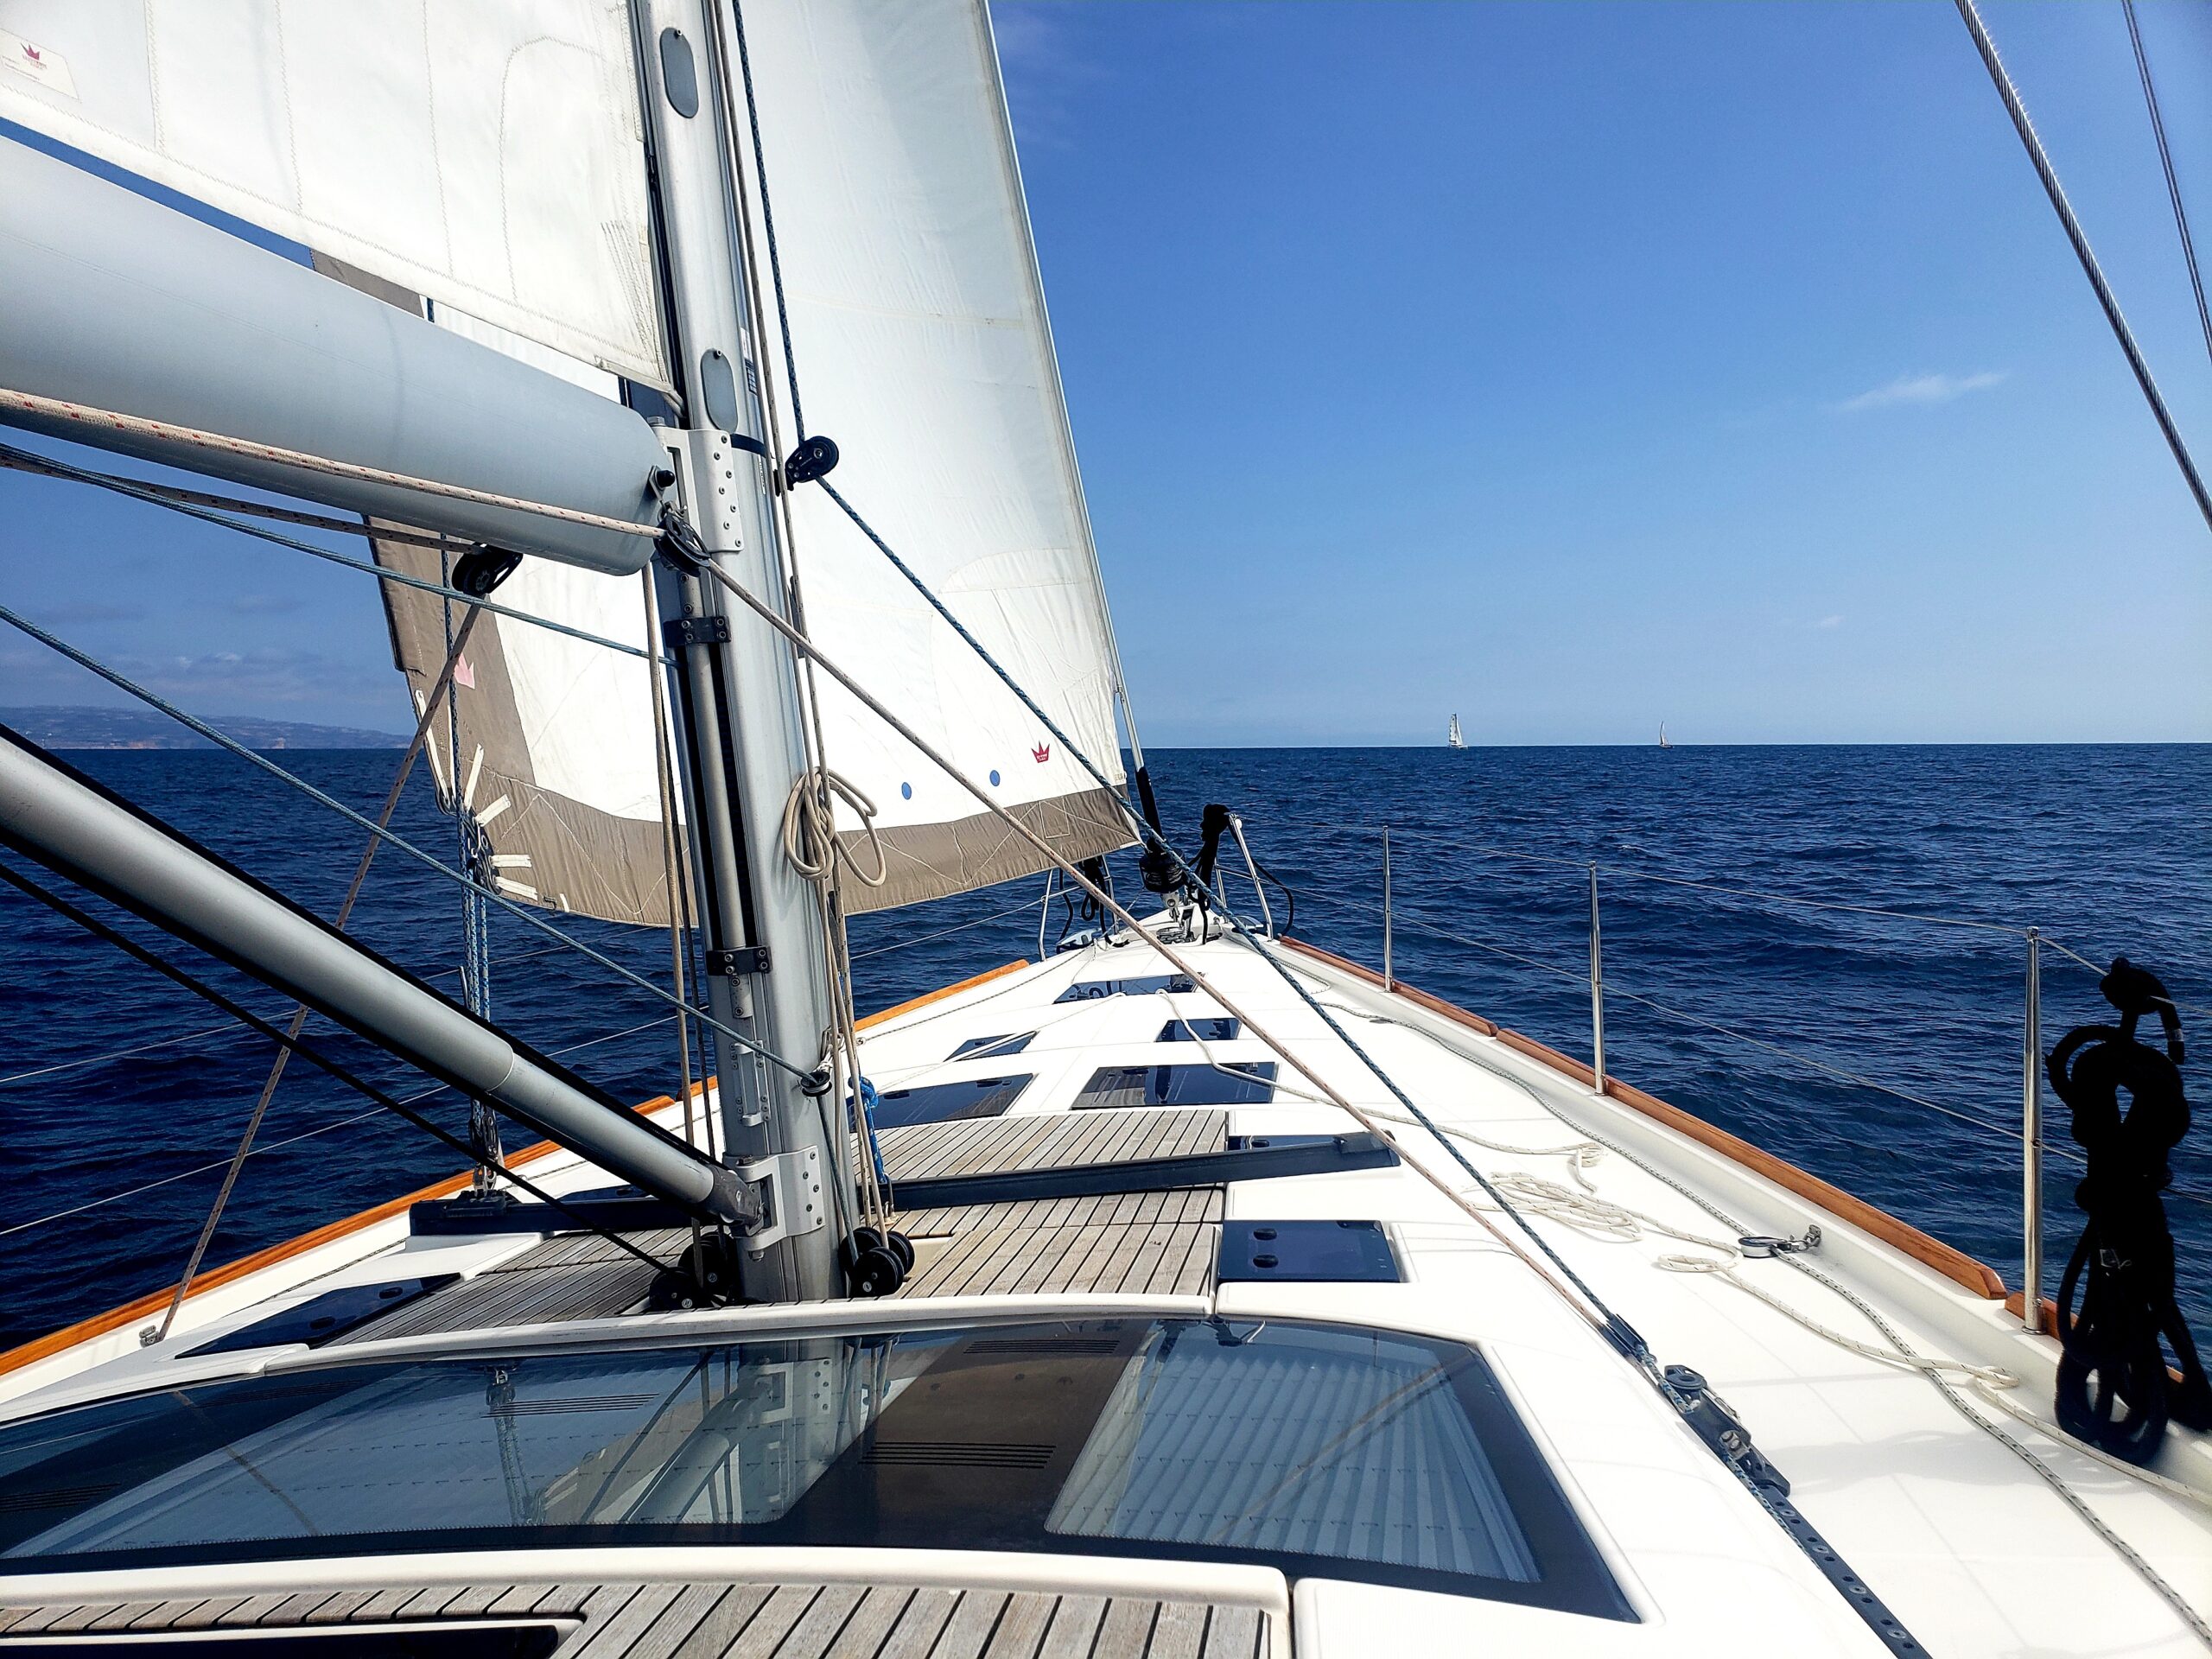 Bow of sailboat in the ocean